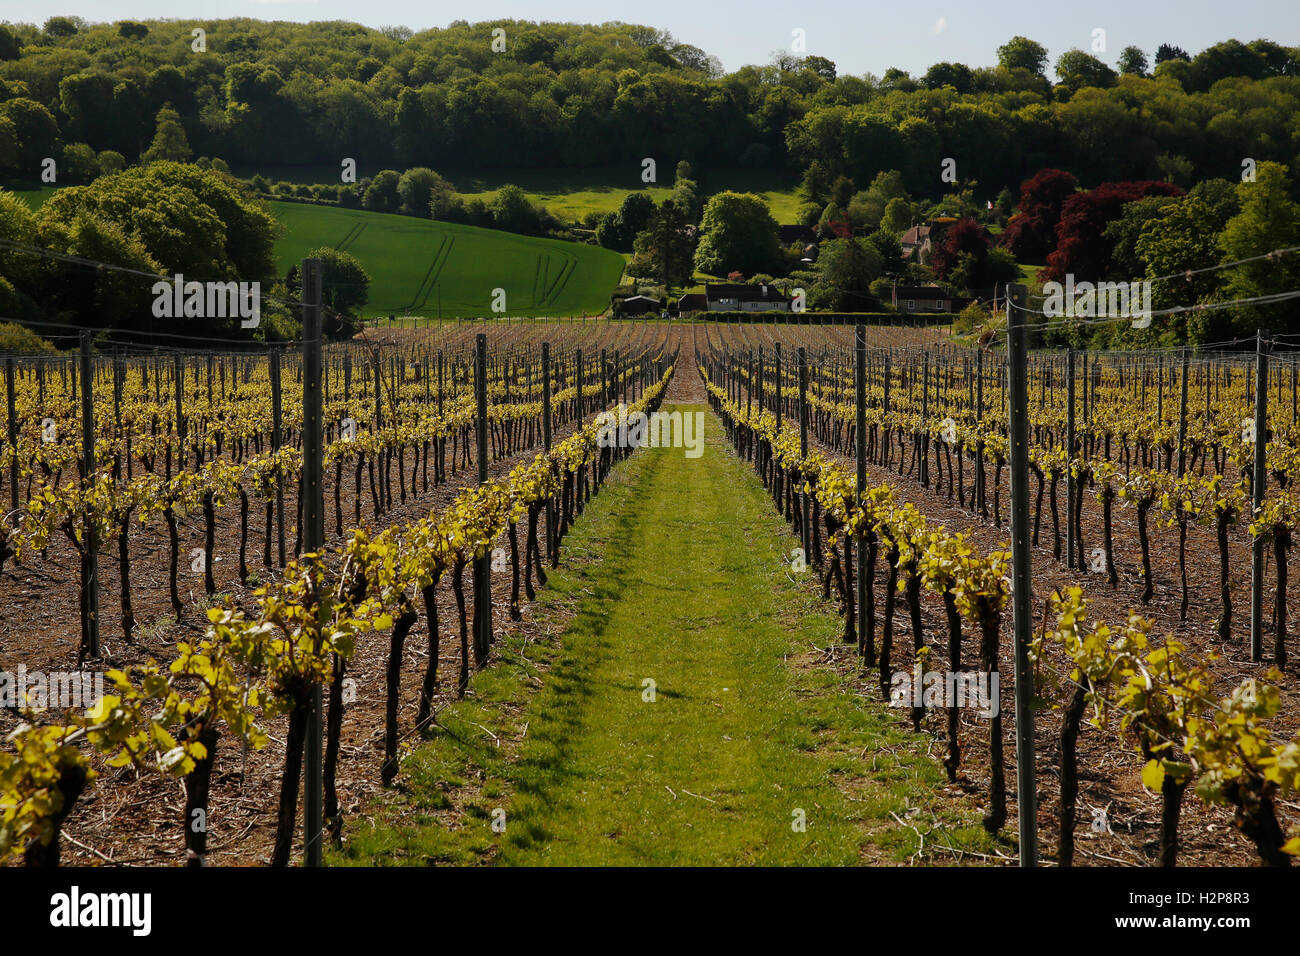 This years vines come into leaf at Hambledon Vineyard situated on the South Downs near Waterlooville in Hampshire May 20, 2015. Stock Photo